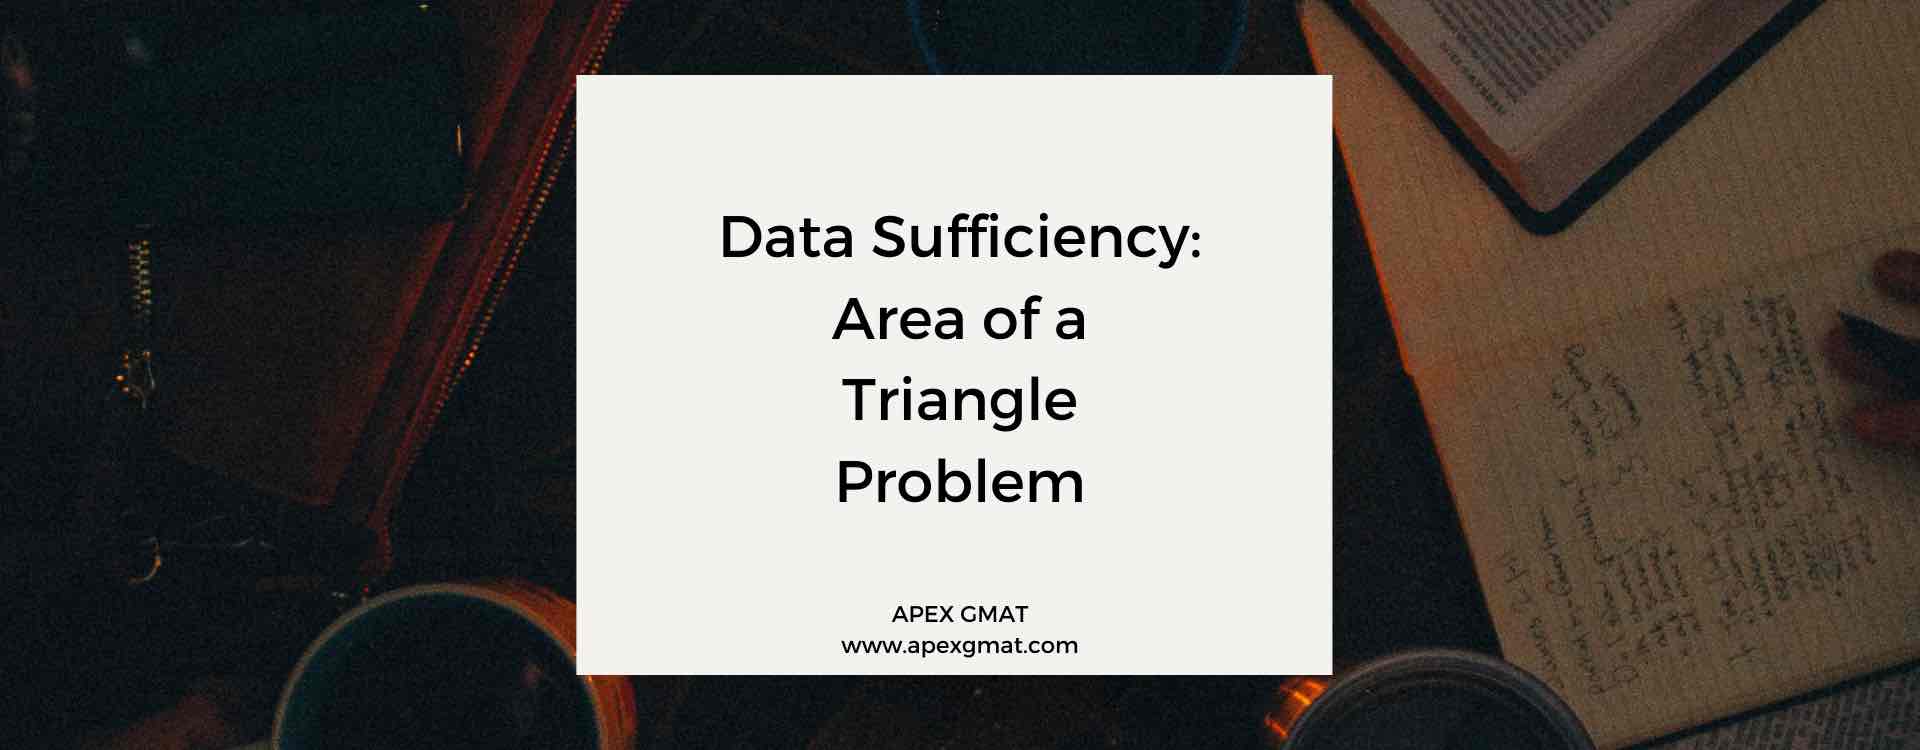 Data Sufficiency: Area of a Triangle Problem